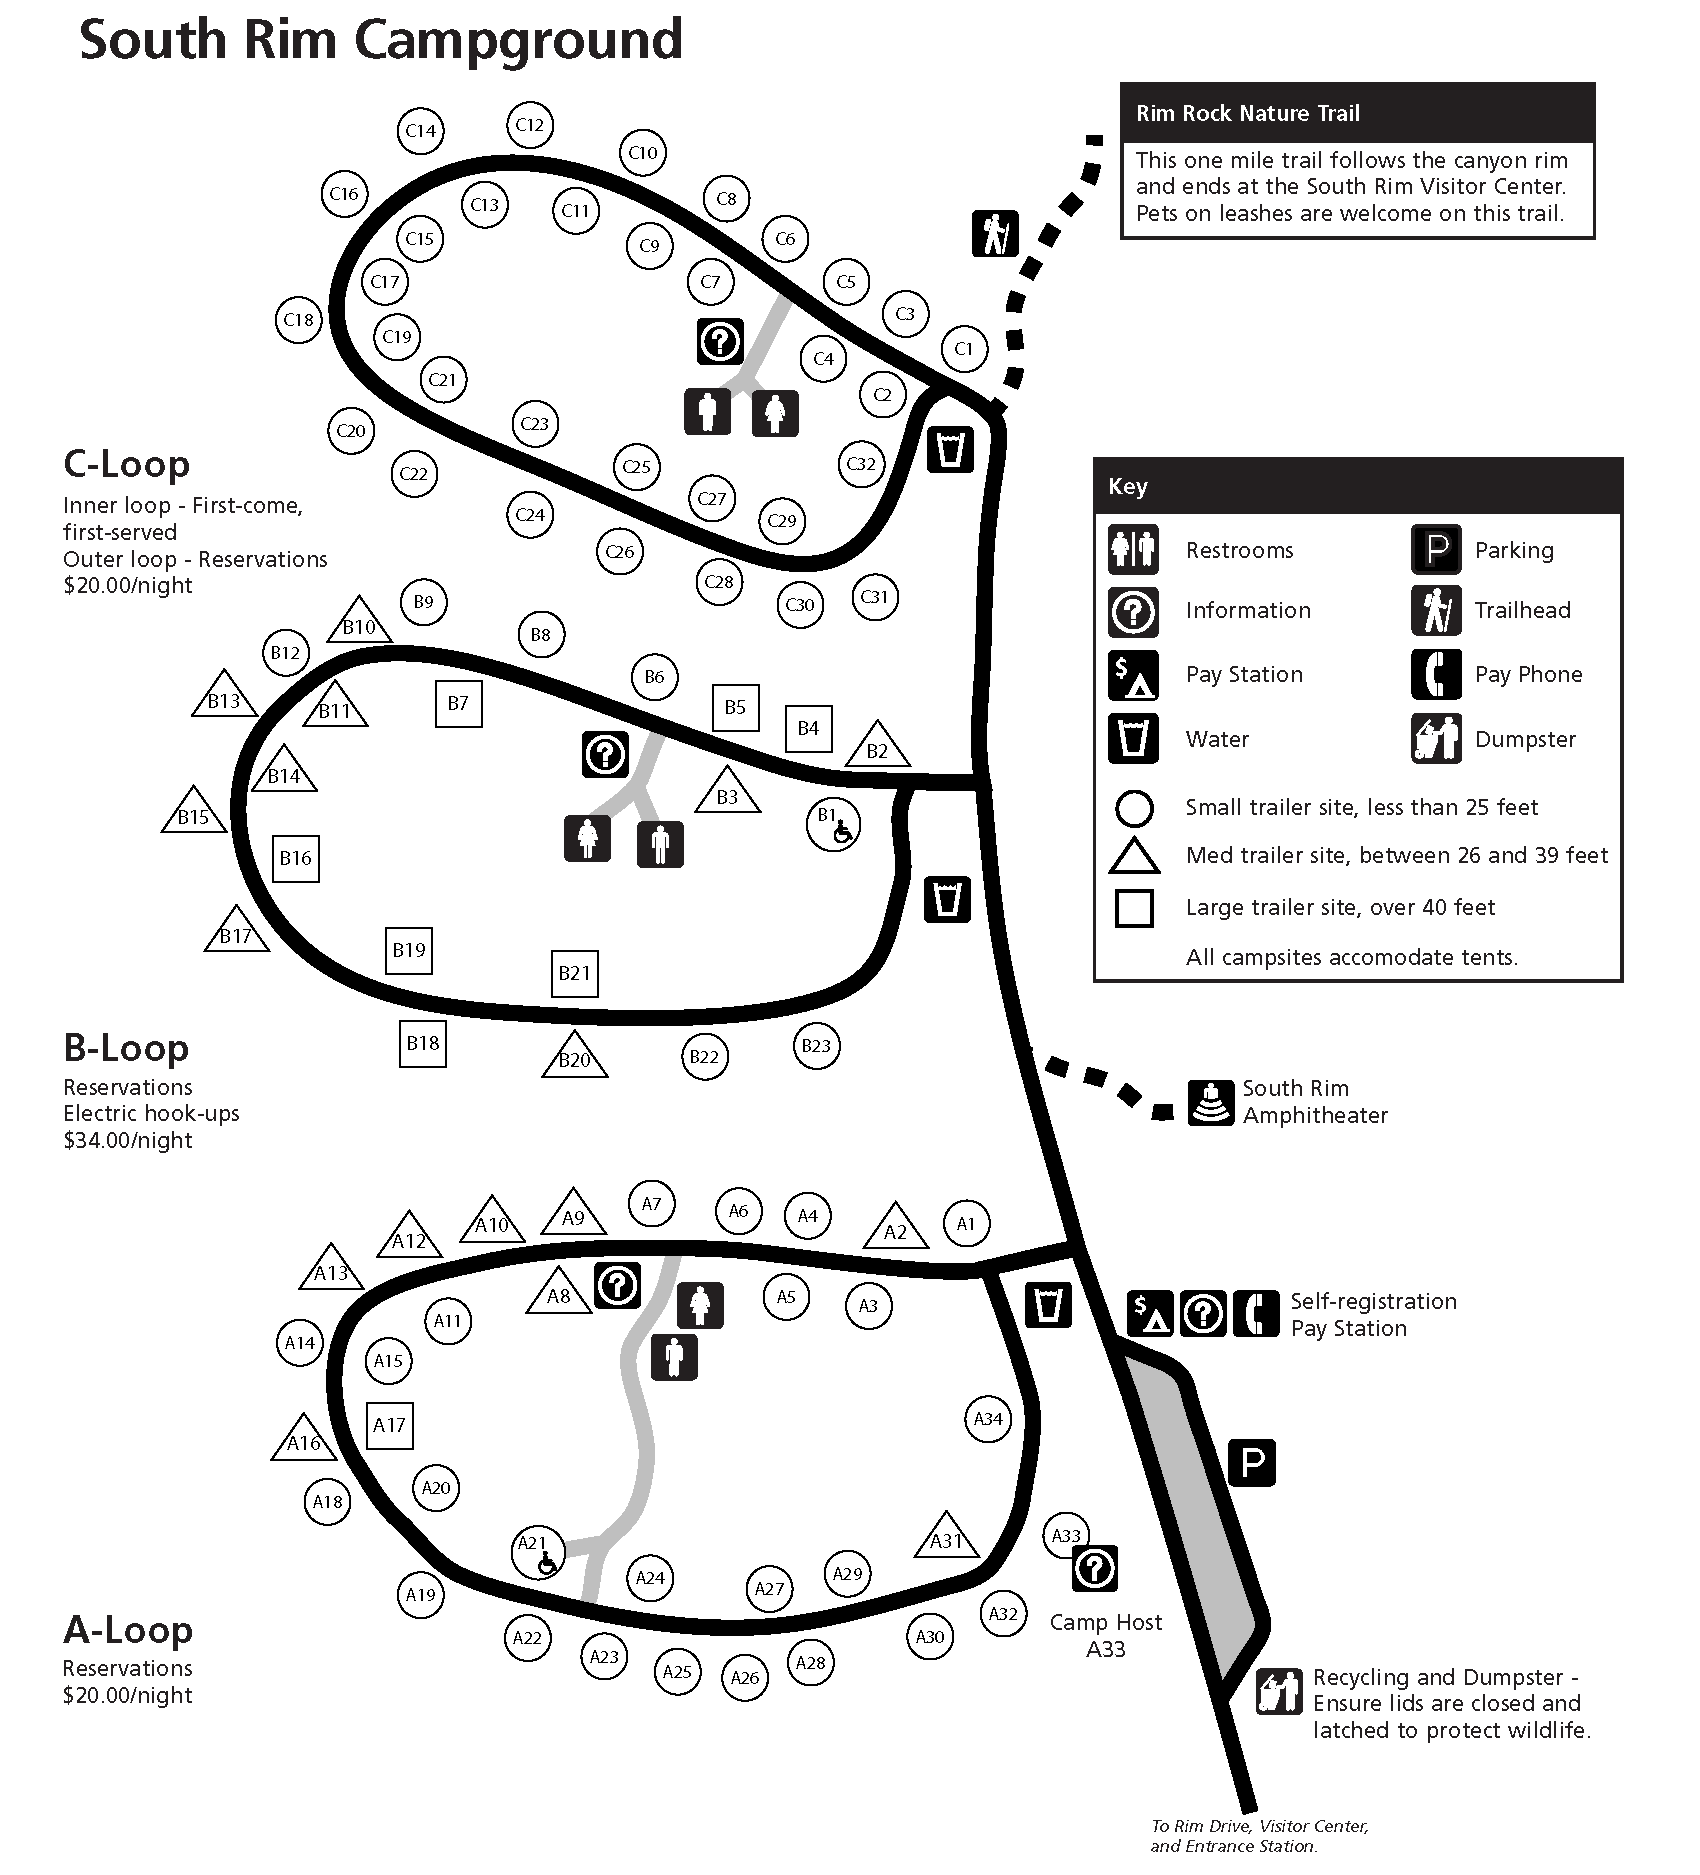 Black and white illustrated map of the South Rim Campground. Each loop shows campsites denoted with shapes and numbers. A legend on the right side shows amenities.